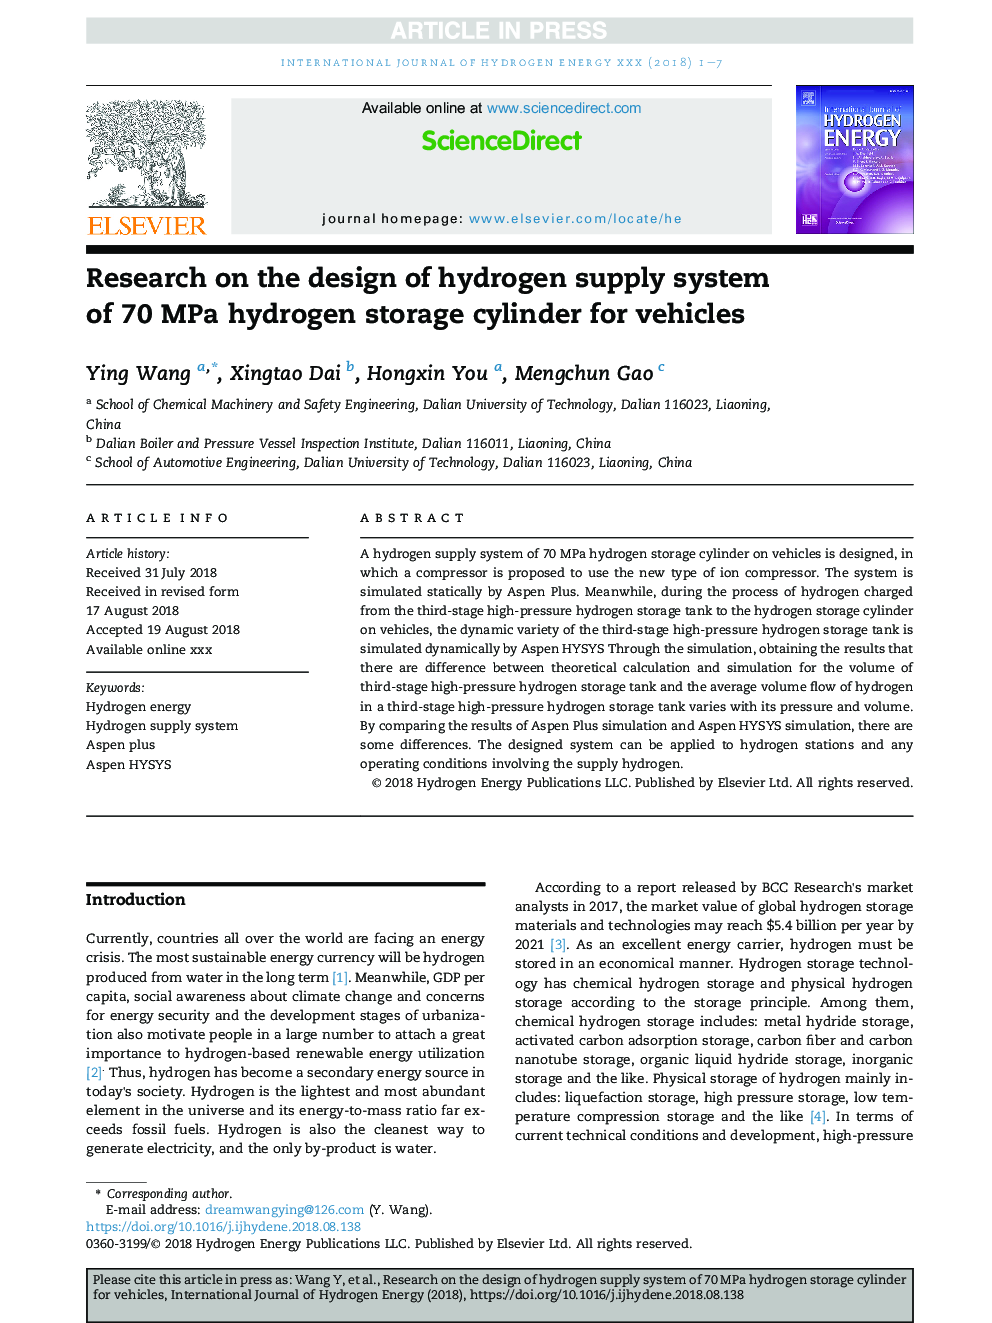 Research on the design of hydrogen supply system of 70Â MPa hydrogen storage cylinder for vehicles